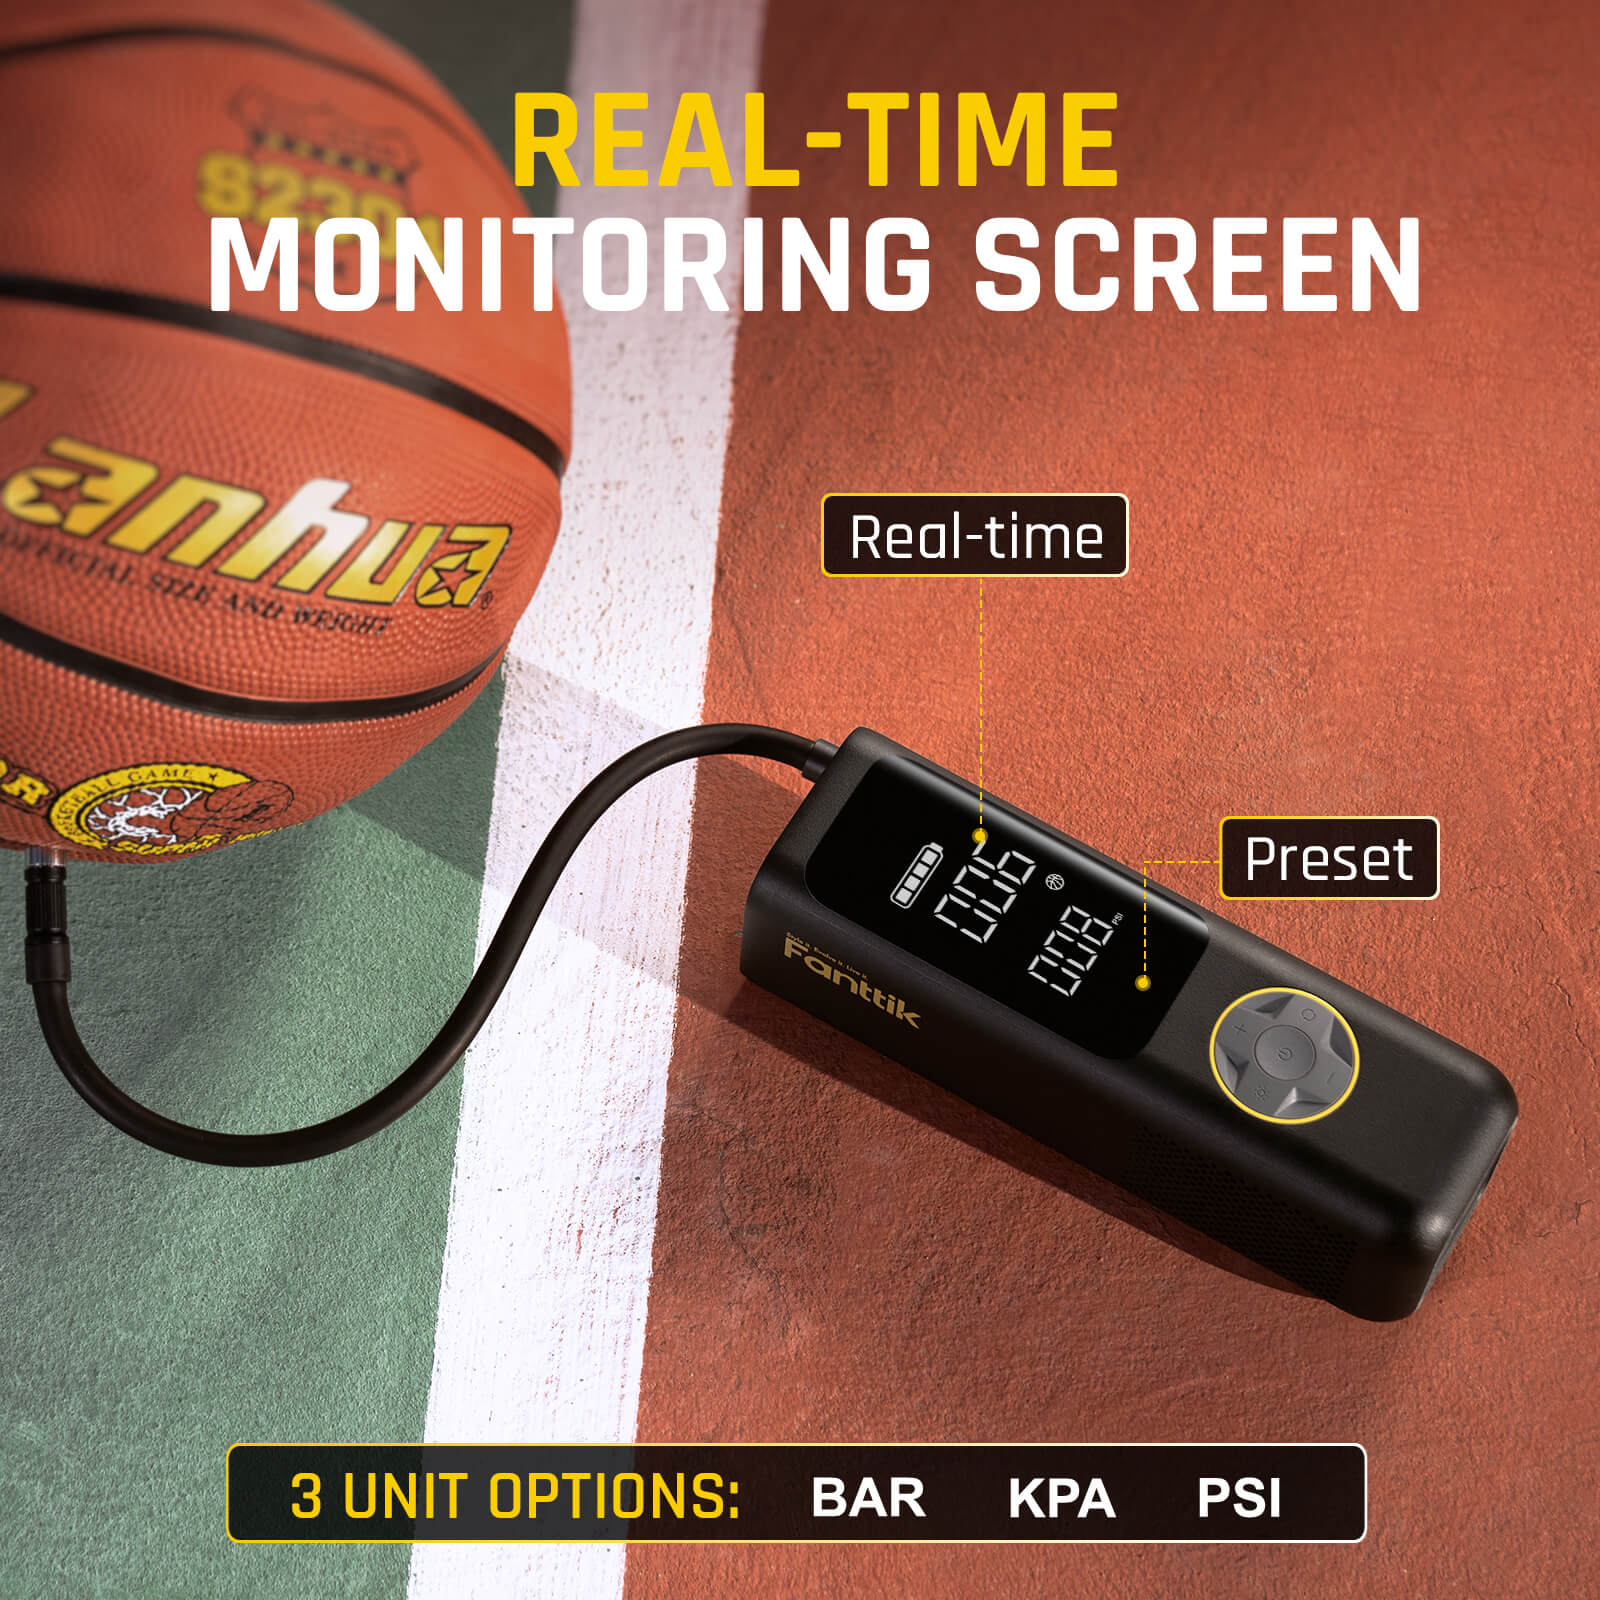 Fanttik X8 Tire Inflators have real-time monitoring screen